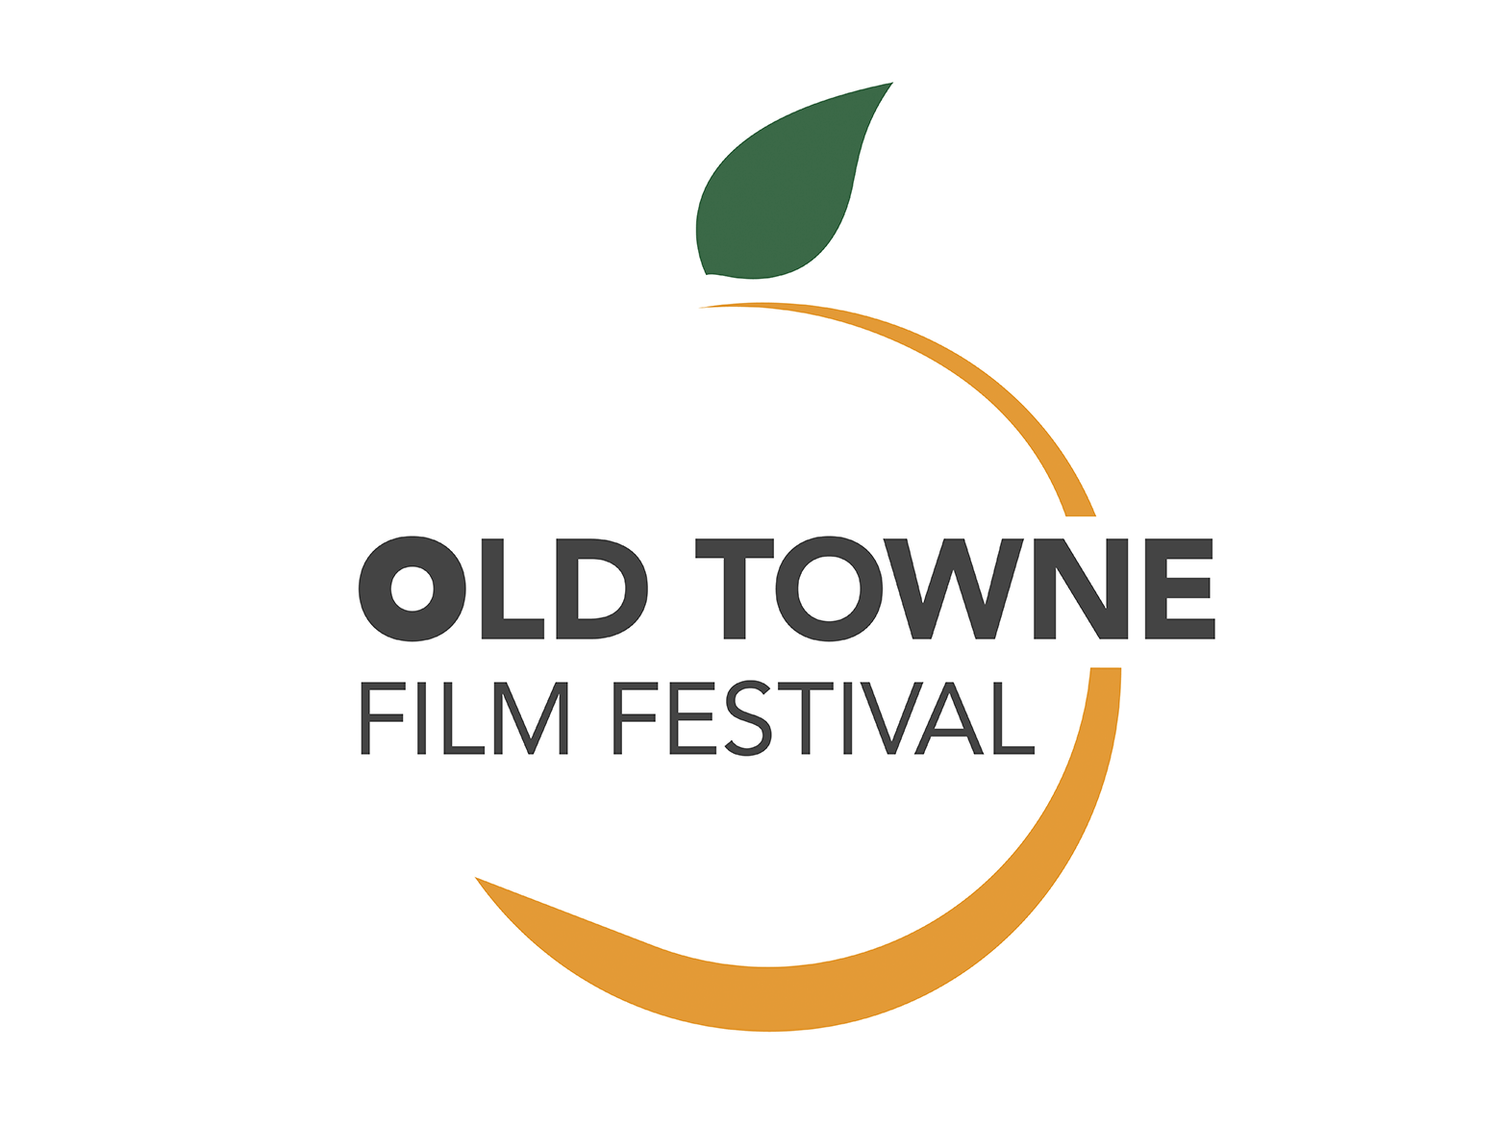 Old Towne Film Festival